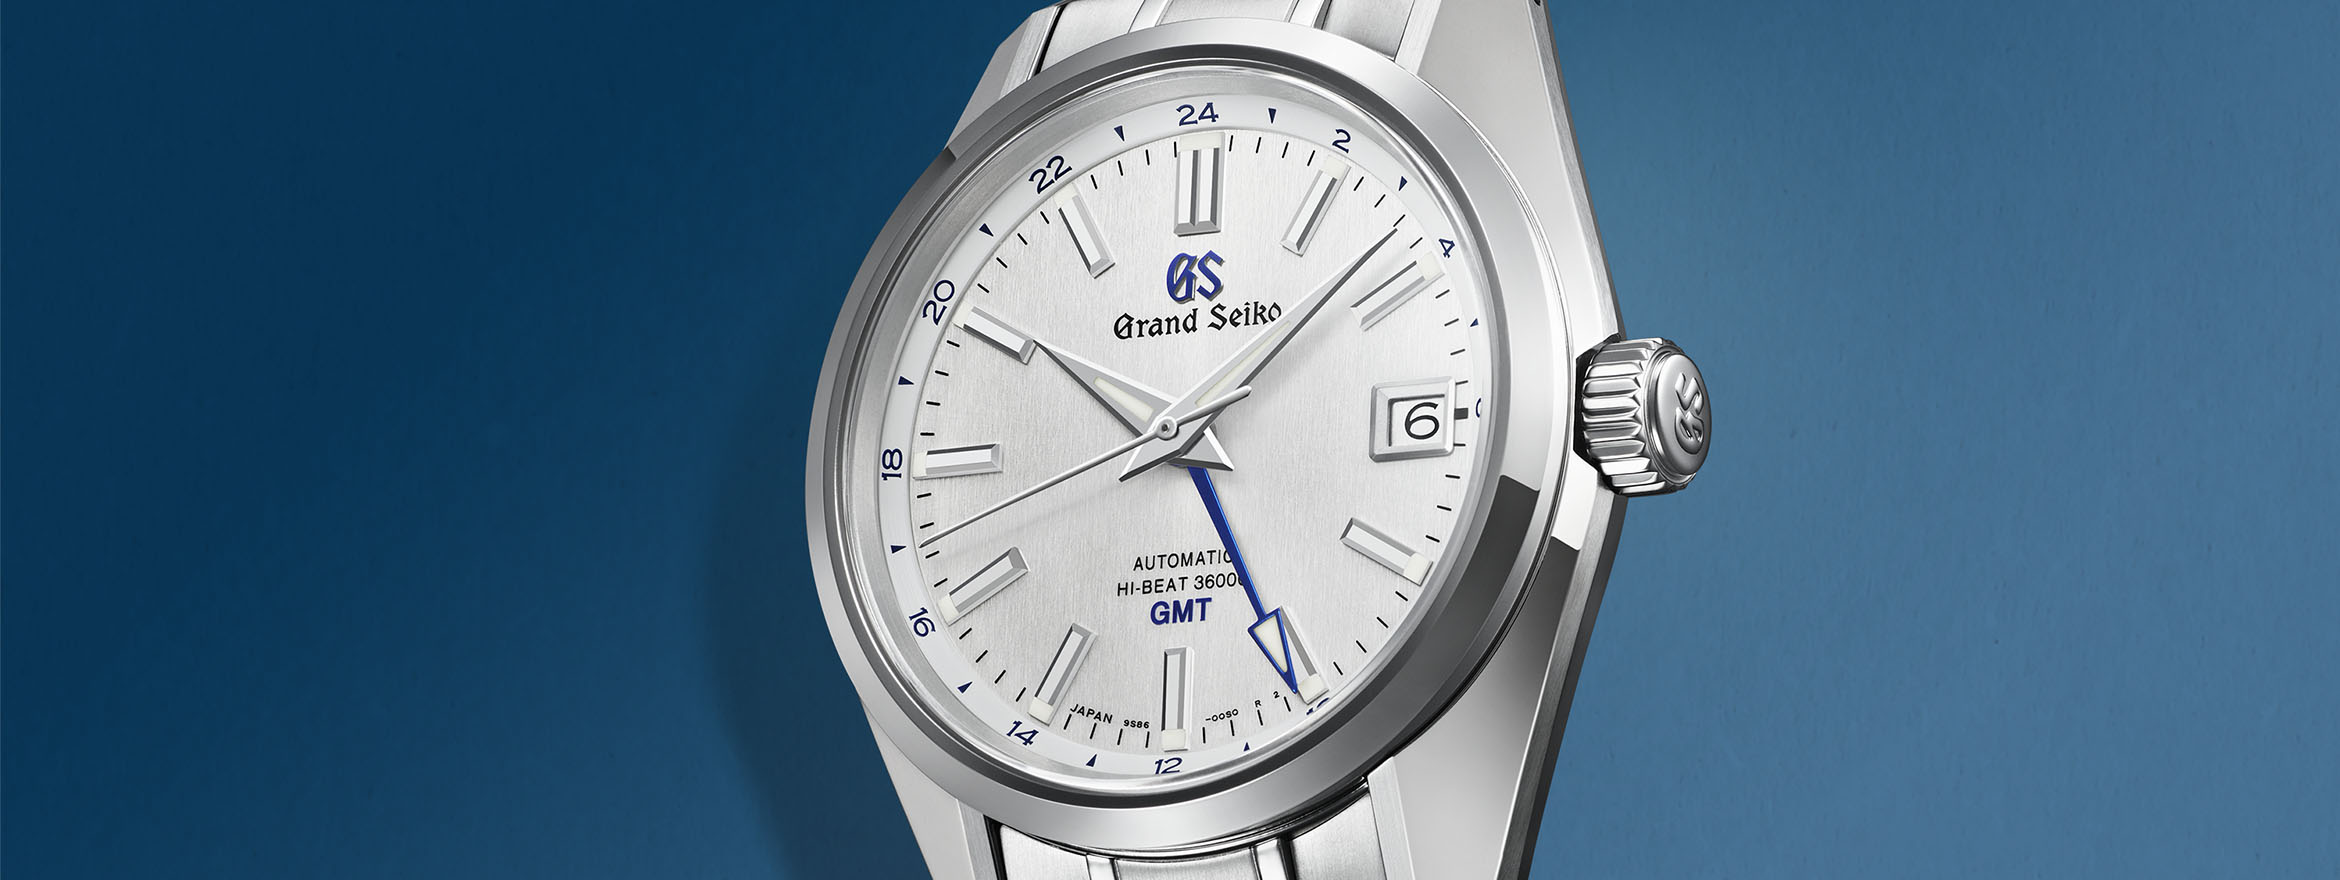 Discover the new Grand Seiko Hi-Beat 36000 GMT watch at Watches of  Switzerland NEX - The Hour Glass Official